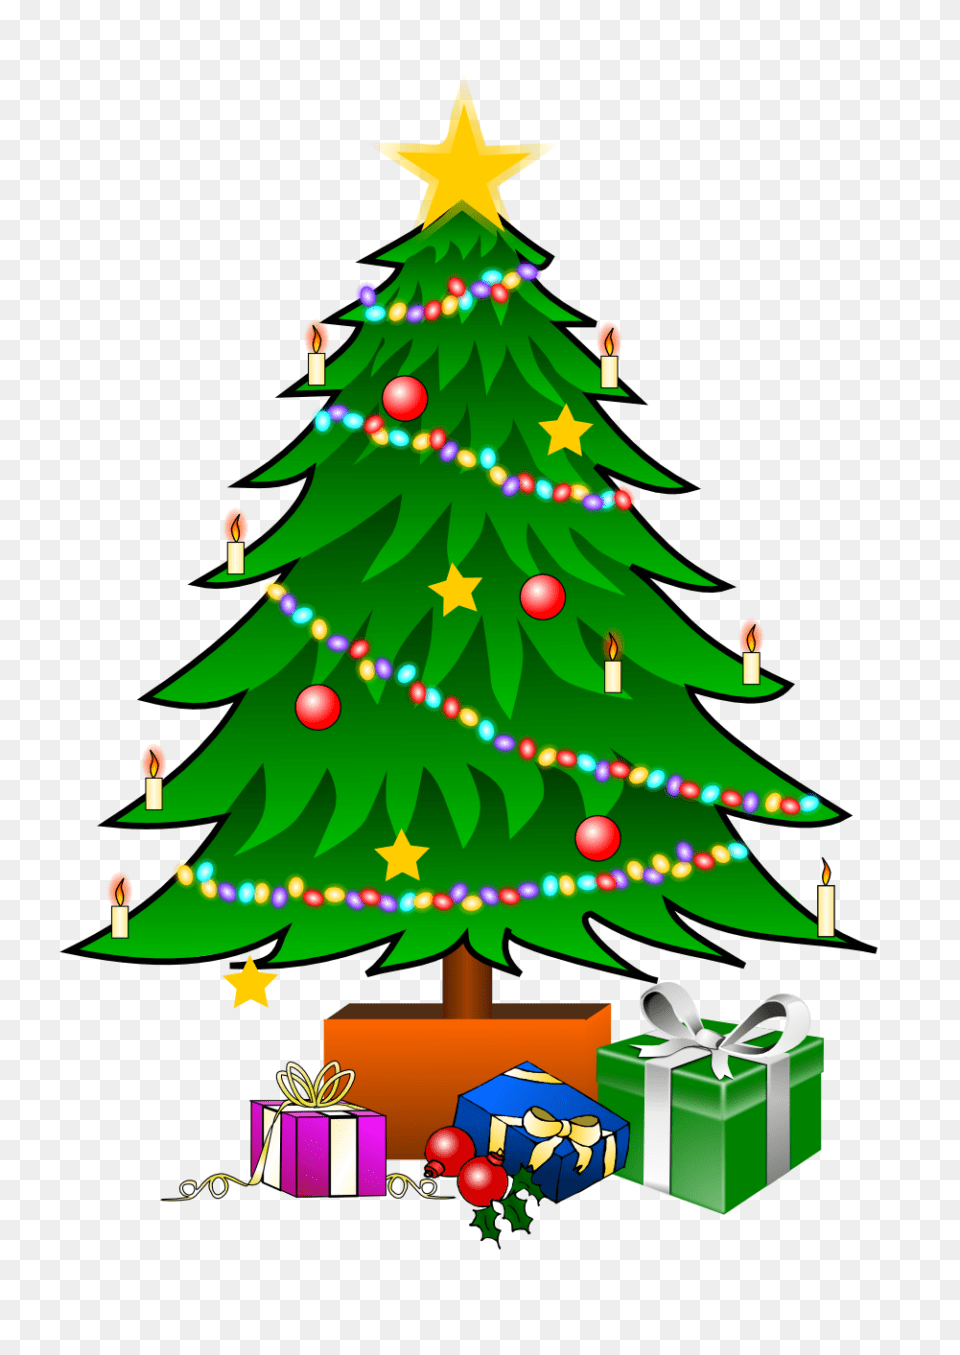 Fantastic How To Get Christmas Tree Picture Ideas Pics, Plant, Christmas Decorations, Festival, Christmas Tree Free Png